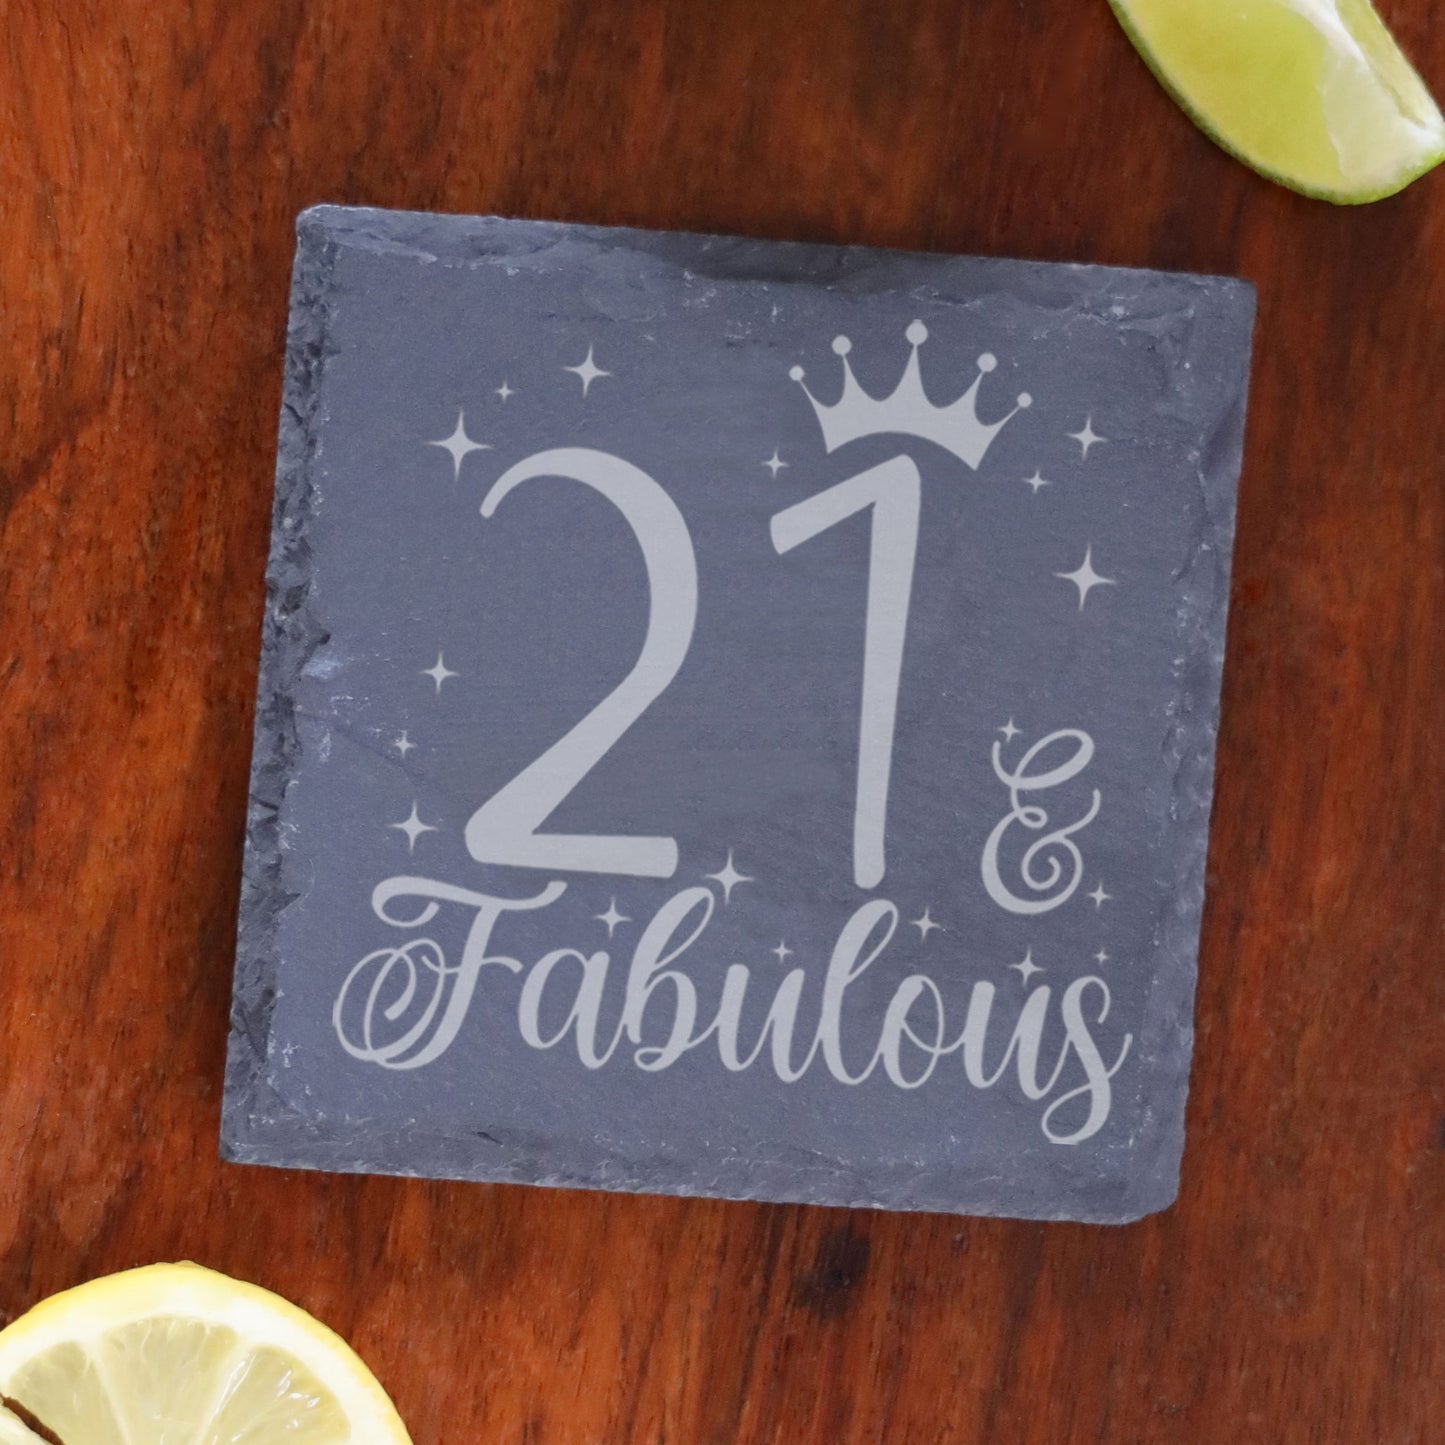 21 & Fabulous 21st Birthday Gift Engraved Wine Glass and/or Coaster Set  - Always Looking Good - Square Coaster Only  